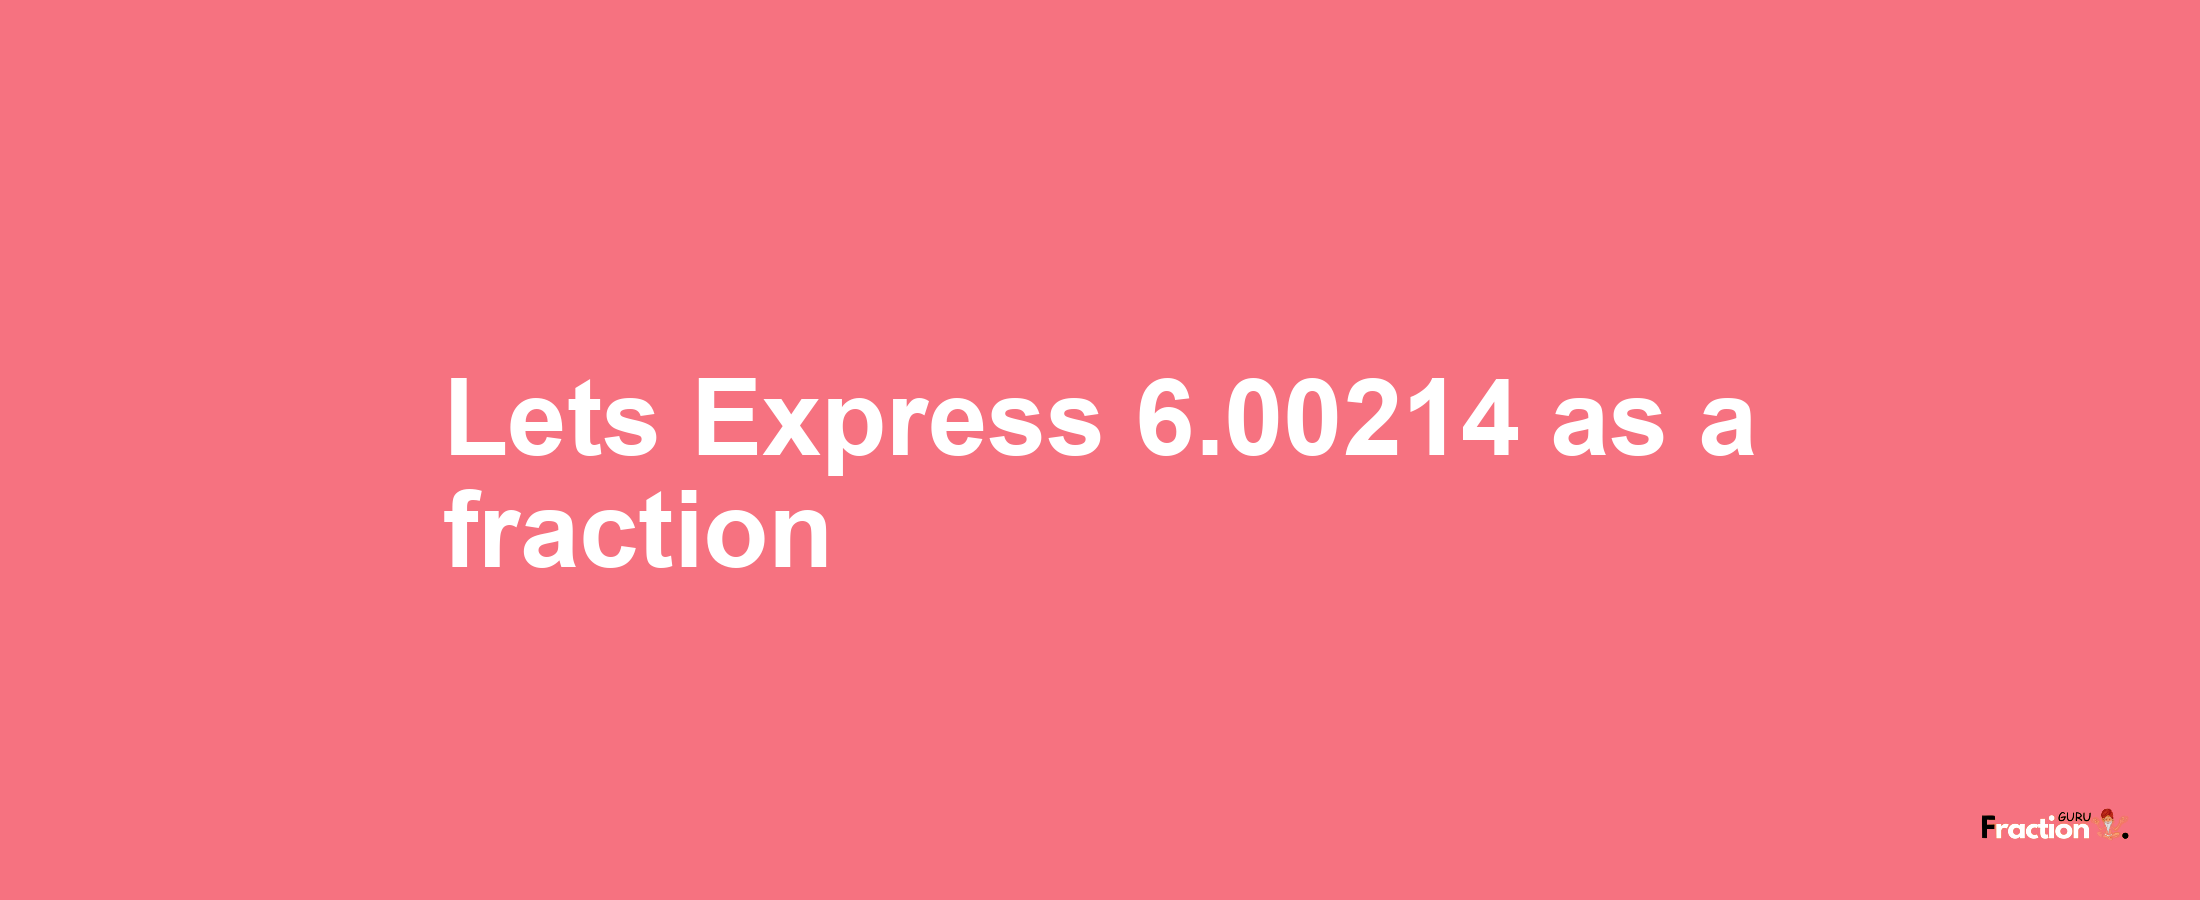 Lets Express 6.00214 as afraction